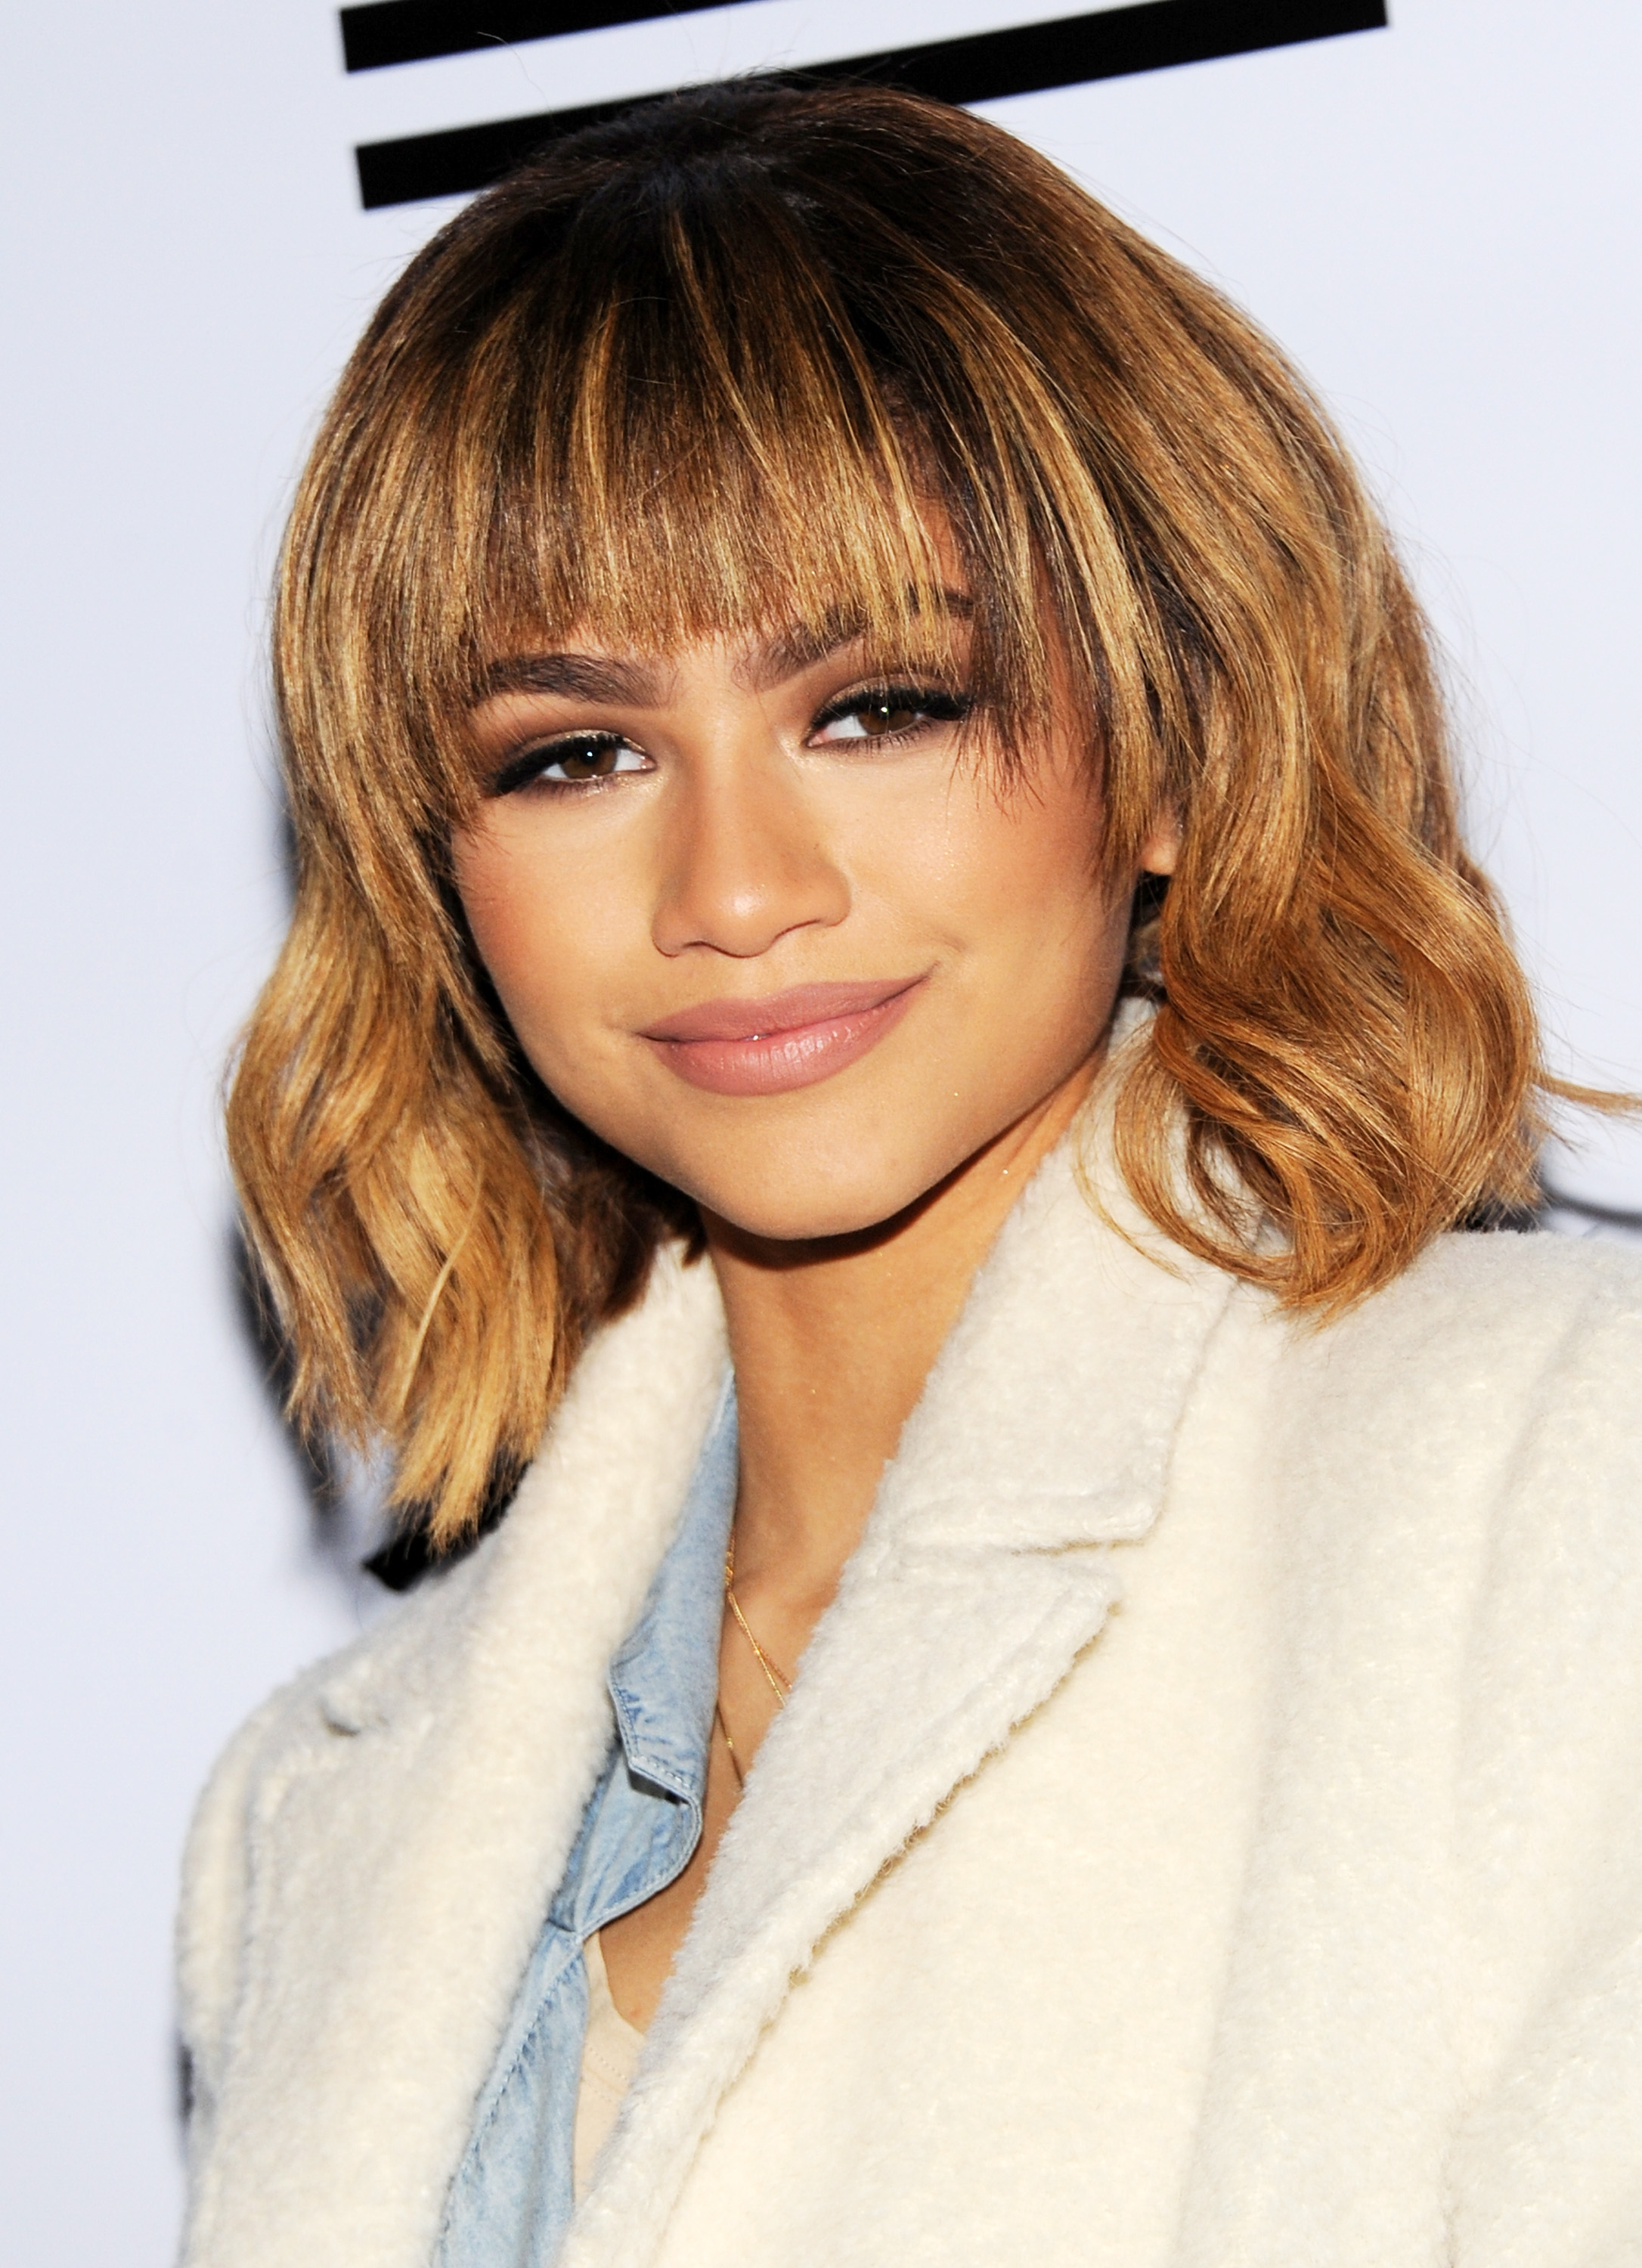 Singer/actress Zendaya attends 'Something New' Fan Event at Black Tap on February 26, 2016 in New York City. (Desiree Navarro—WireImage/Getty Images)